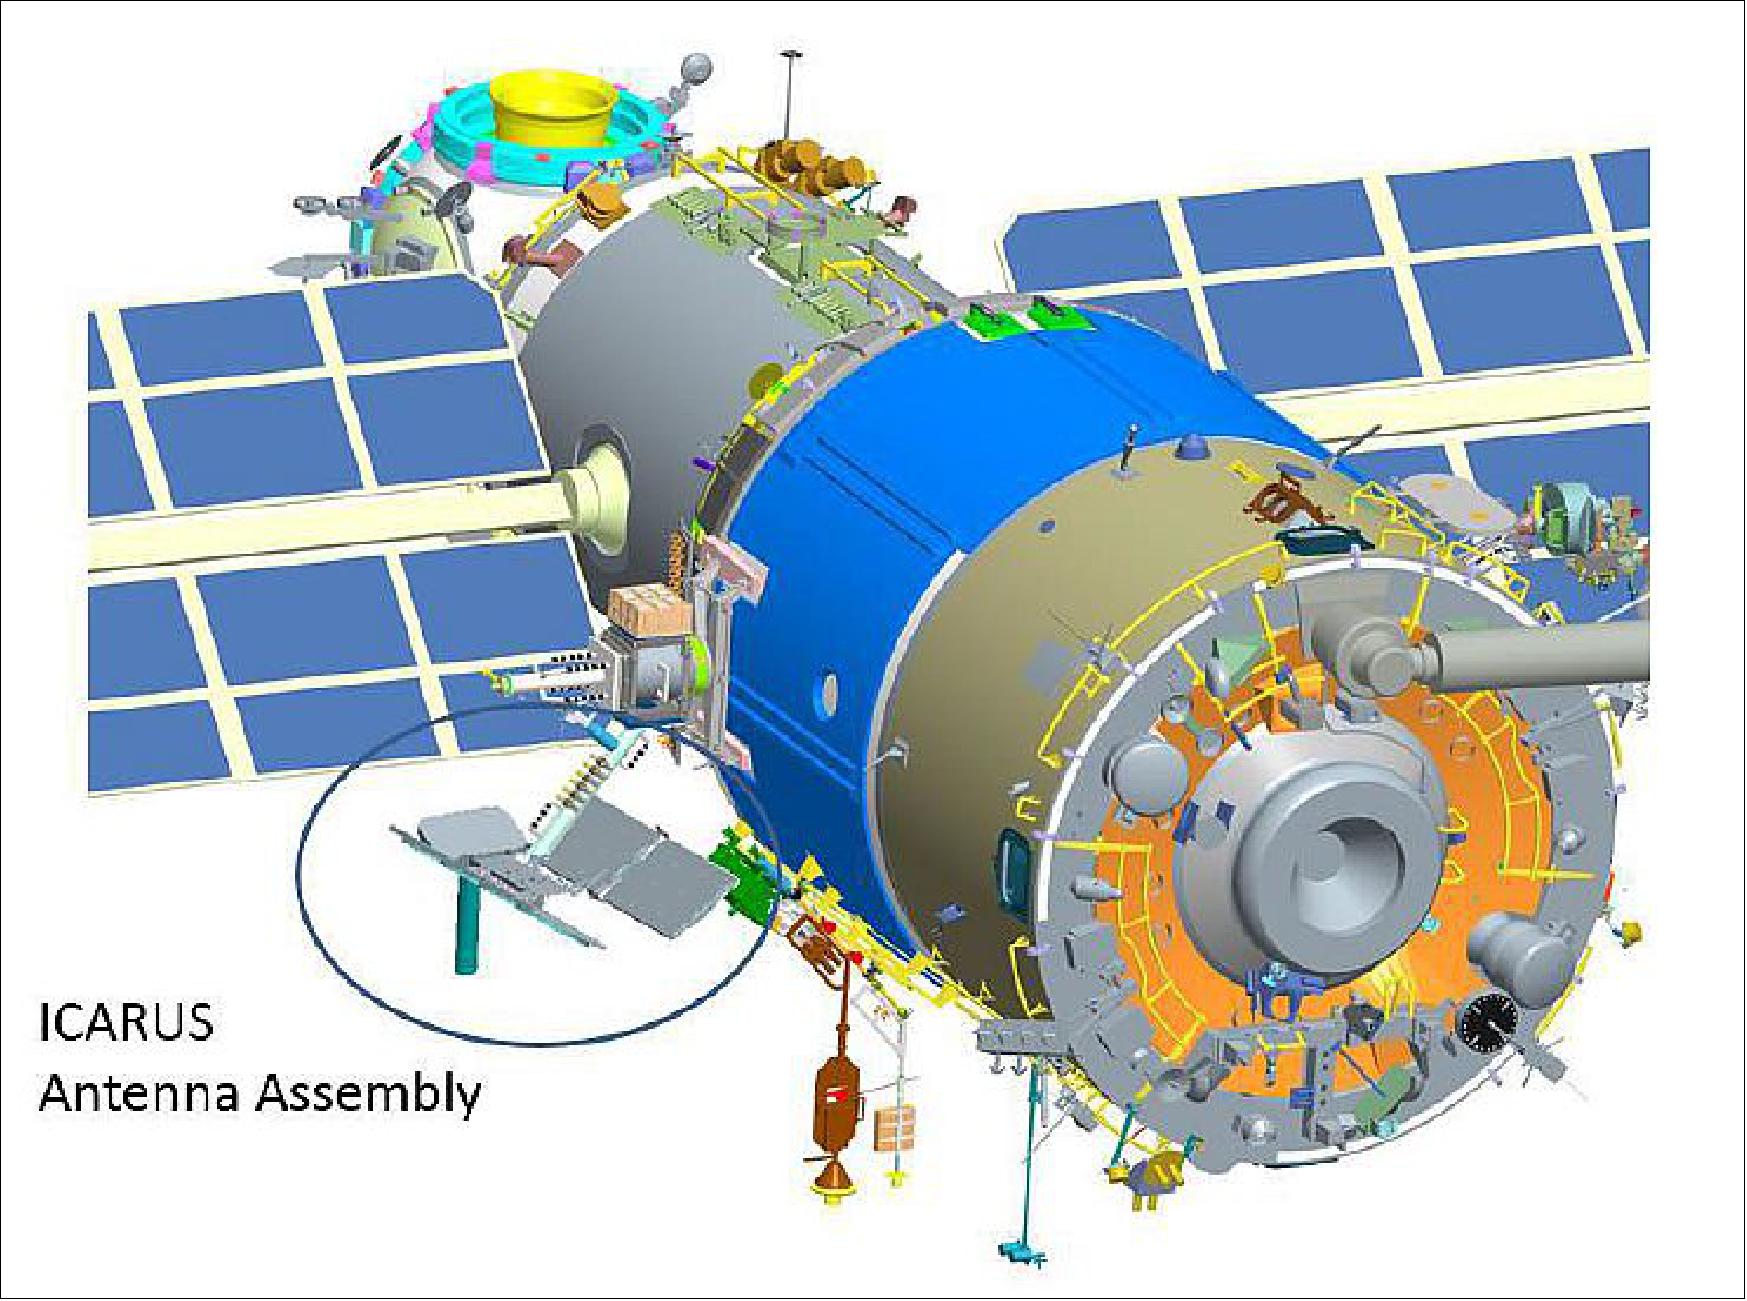 Figure 15: The ICARUS antenna accommodation site is on the Service Module of the ISS Russian Segment (image credit: ICARUS consortium)